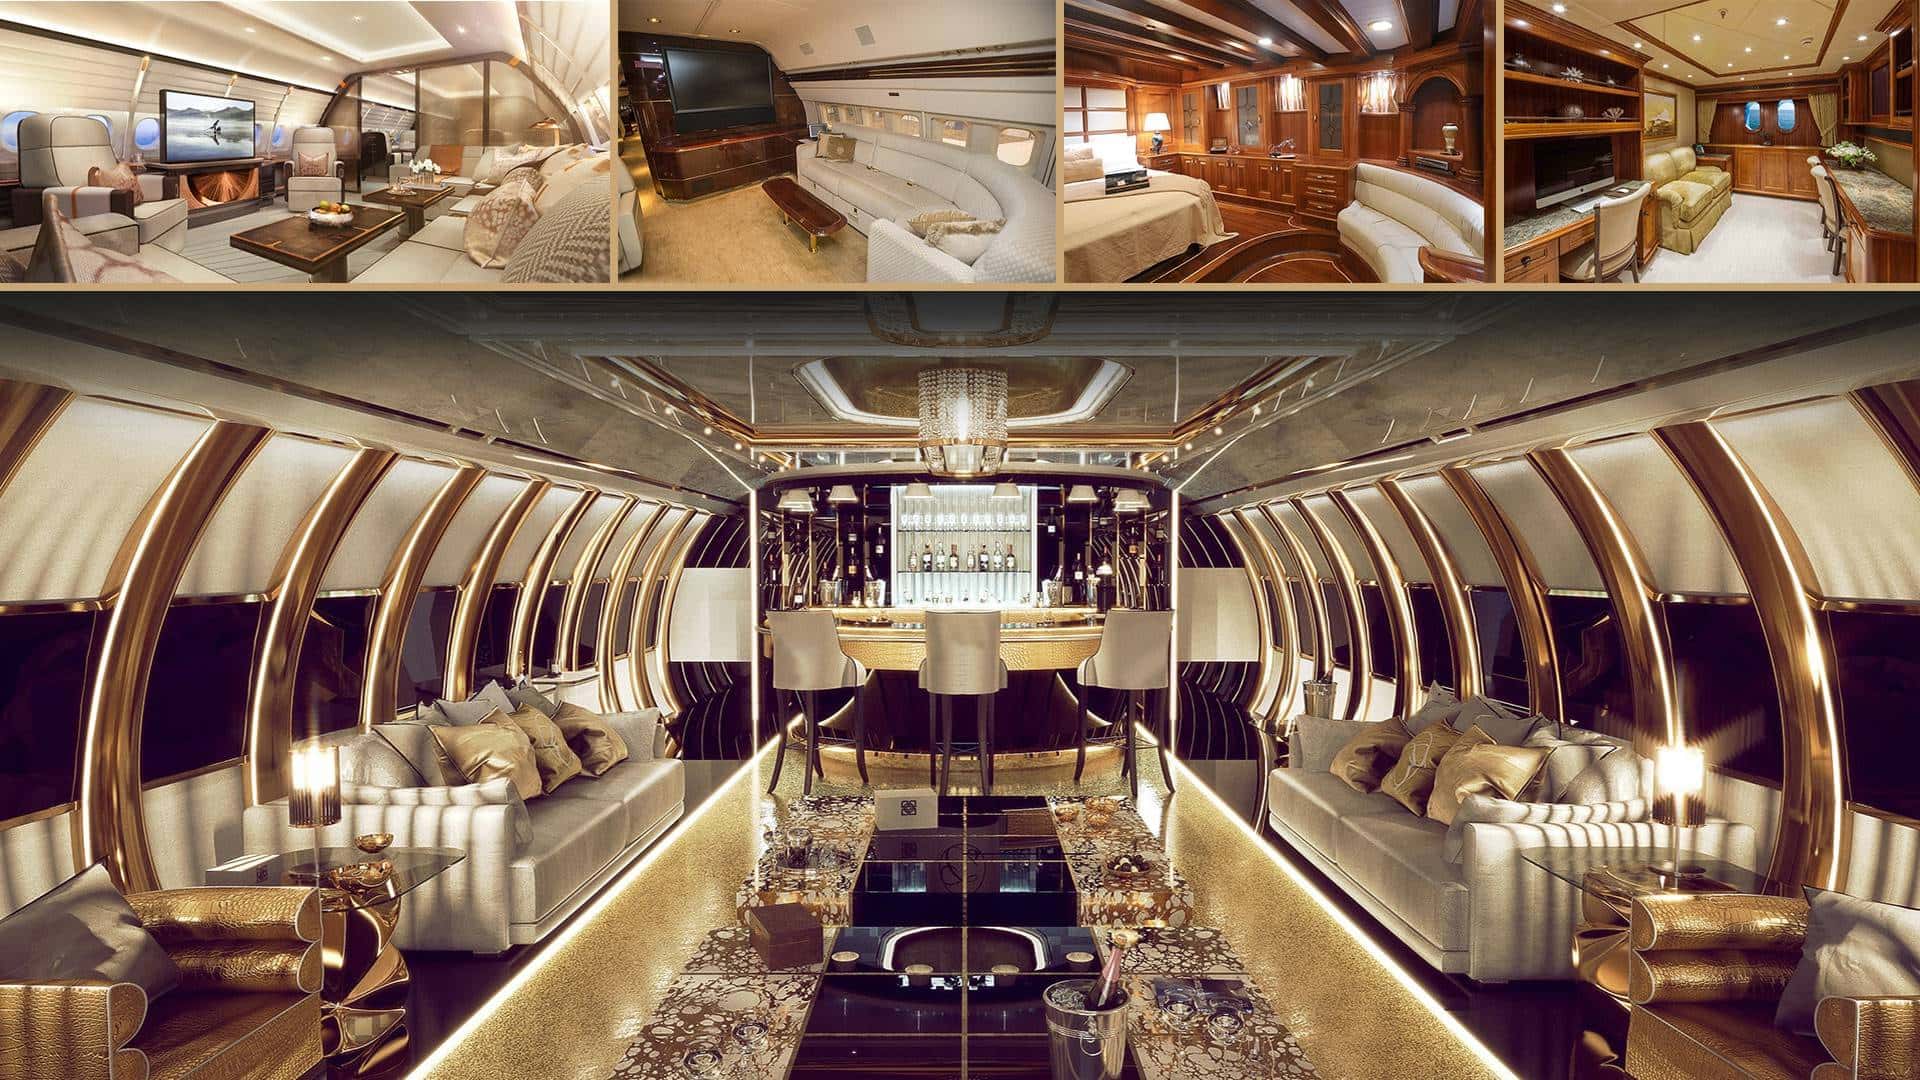 italian high quality precious golden opulent rich luxury lifestyle in private jets yachts classic interior custom-made exclusive italian handmade interior design service